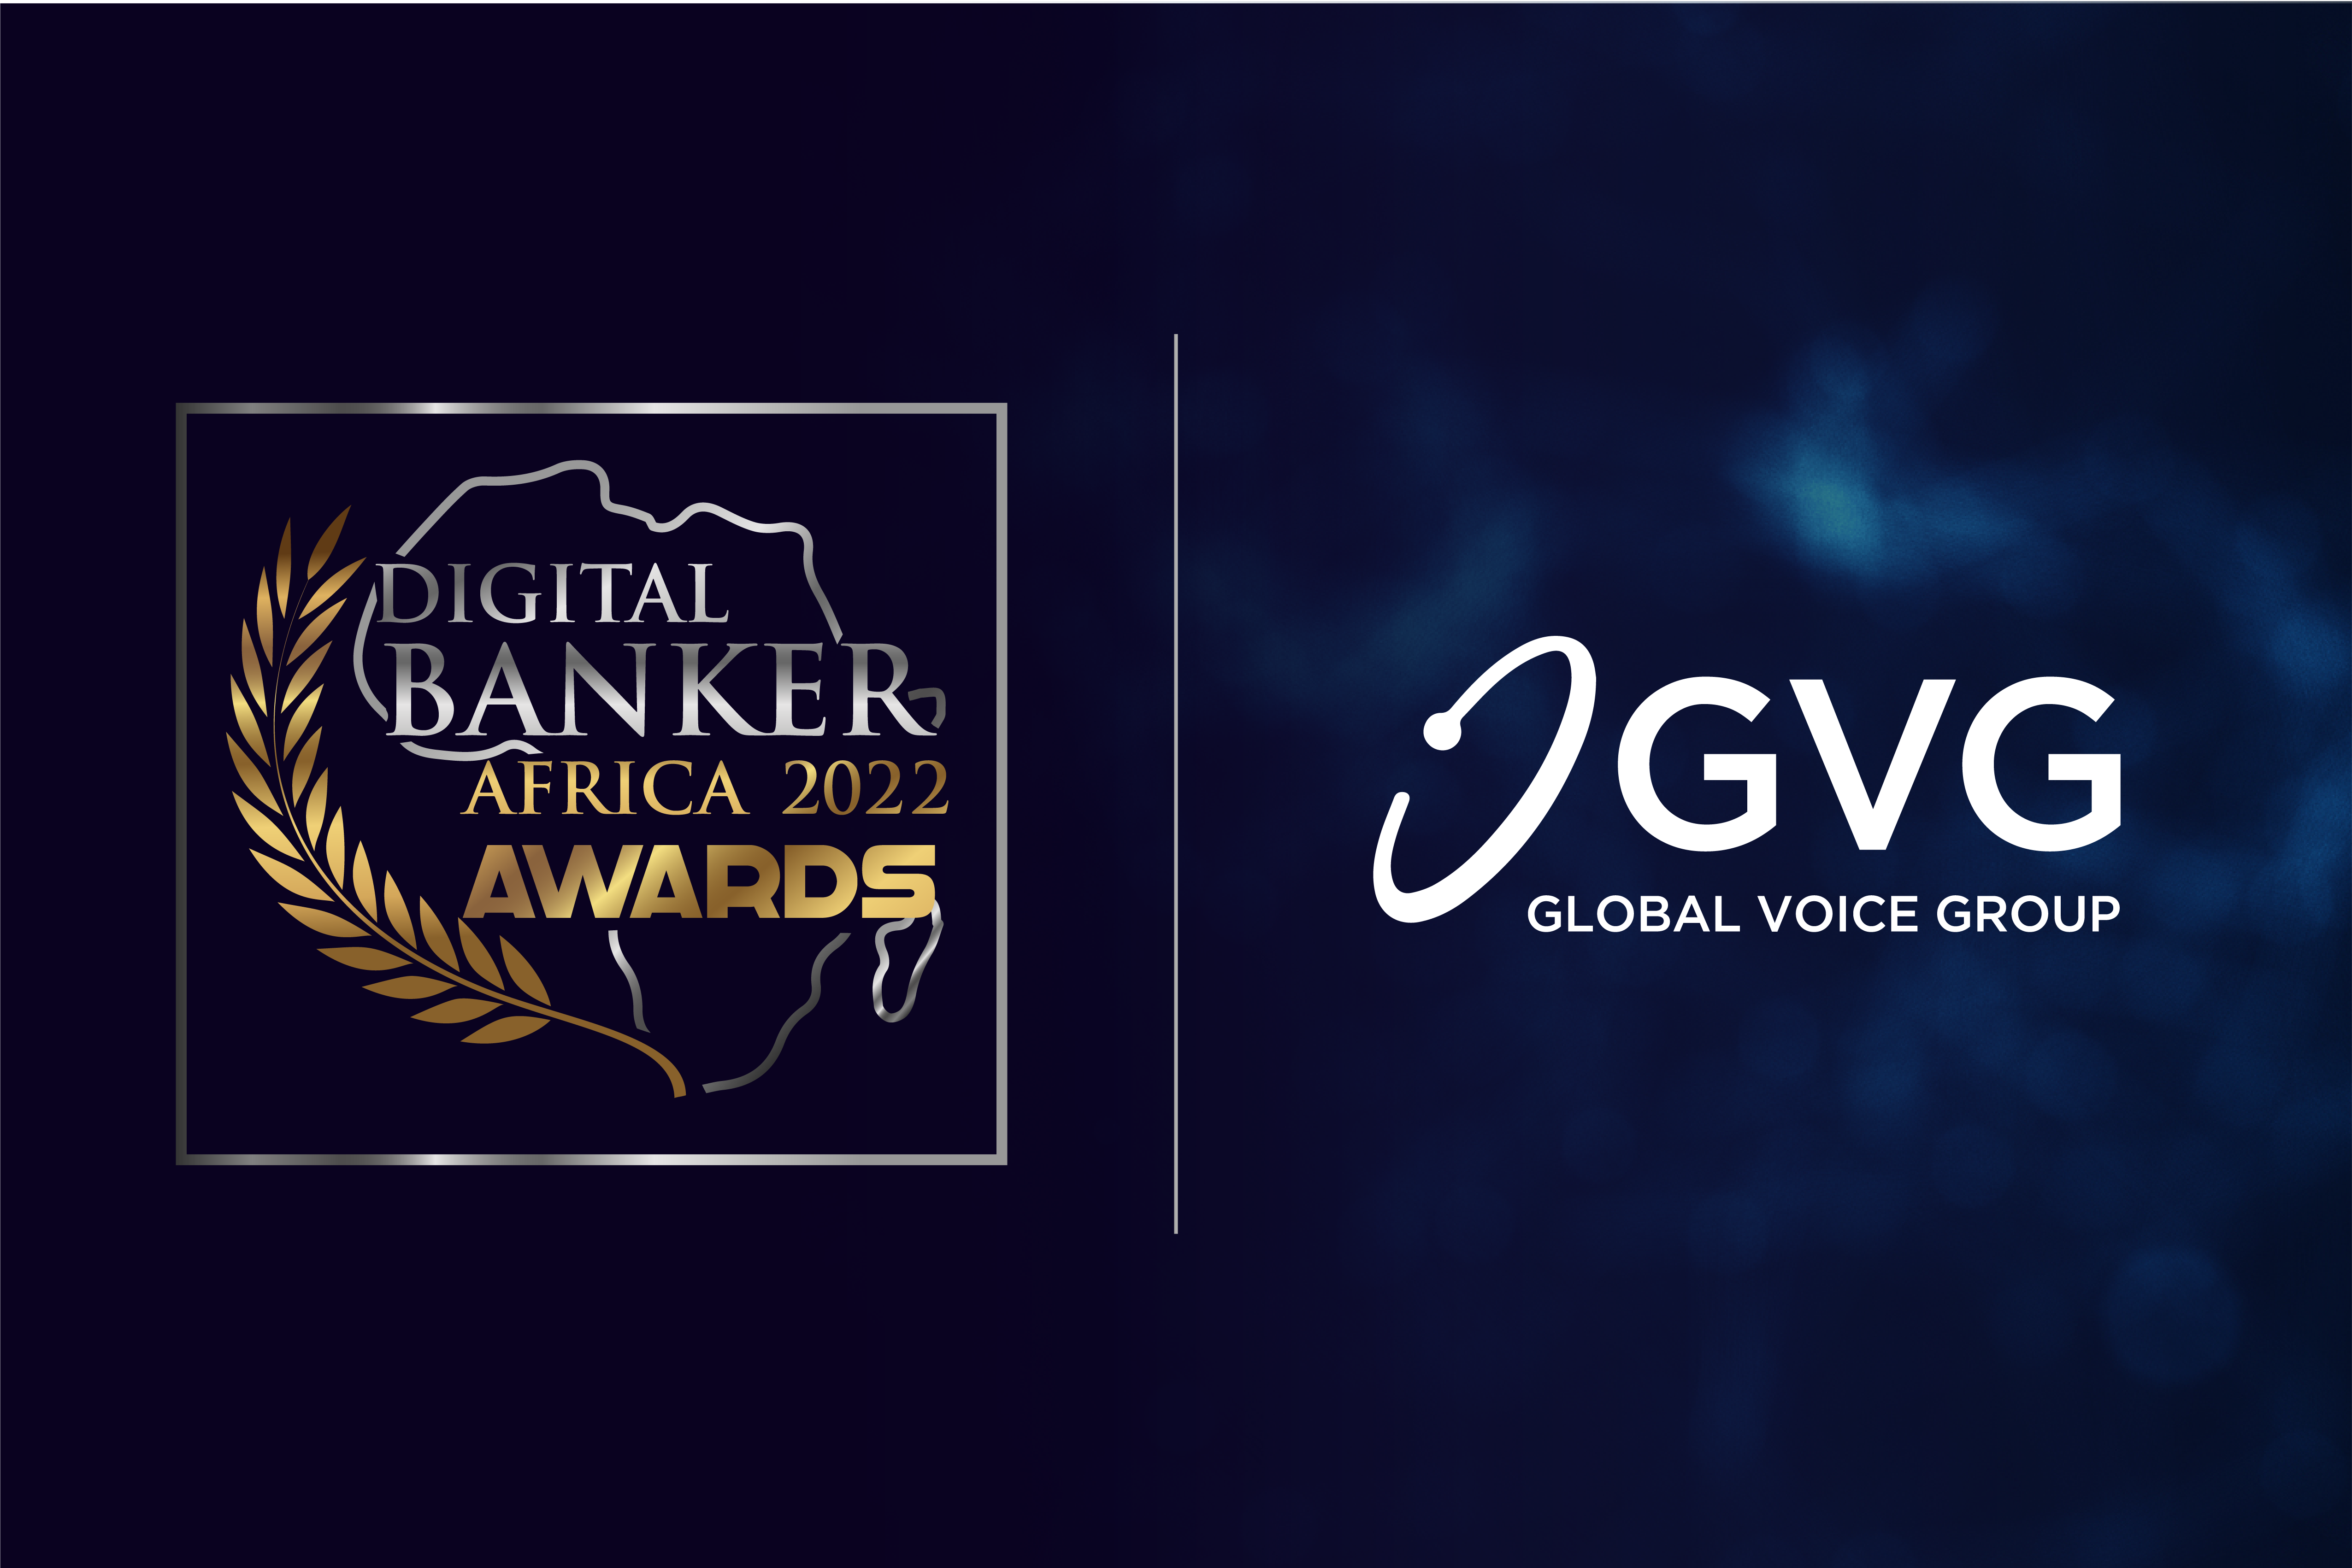 Most Innovative RegTech Solution Provider 2022: A New Award For GVG!